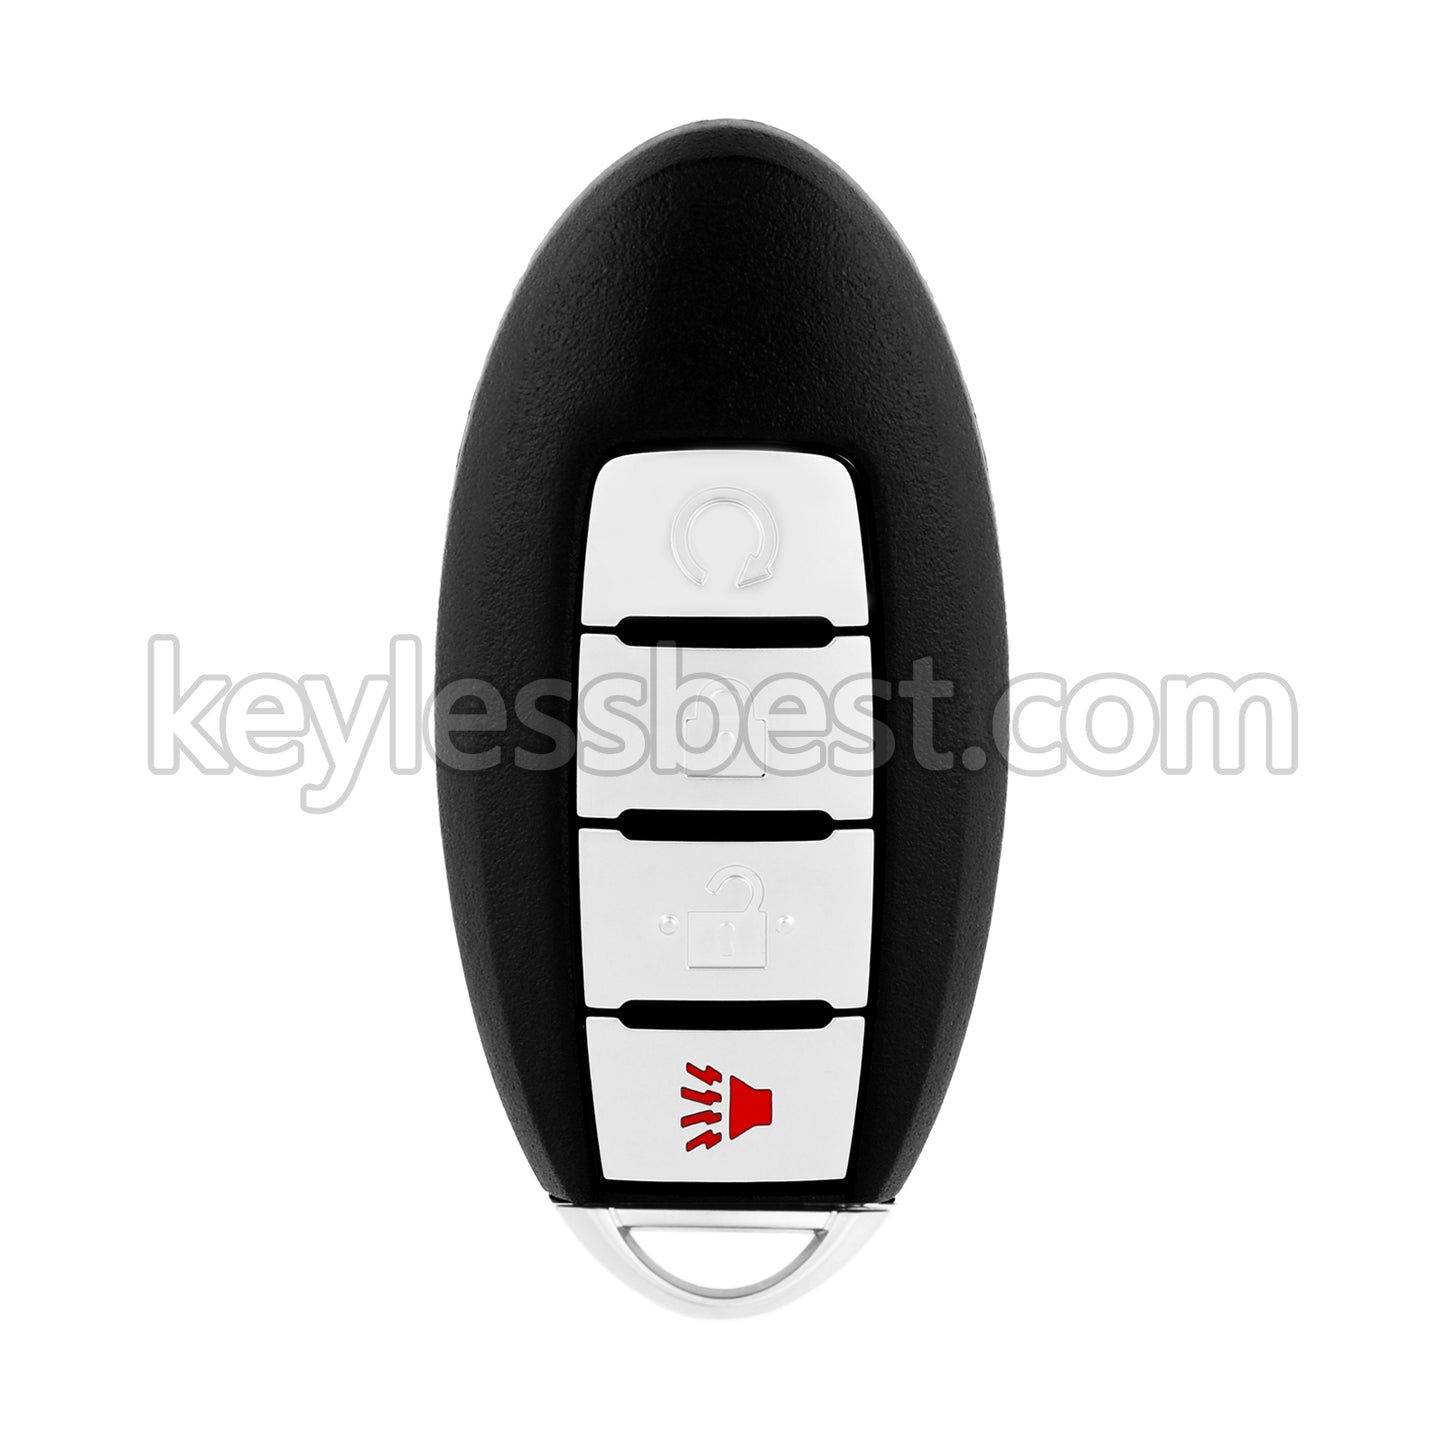 2017 - 2018 Nissan Rogue / 4 Buttons Remote Key / KR5S180144106 / 433MHz